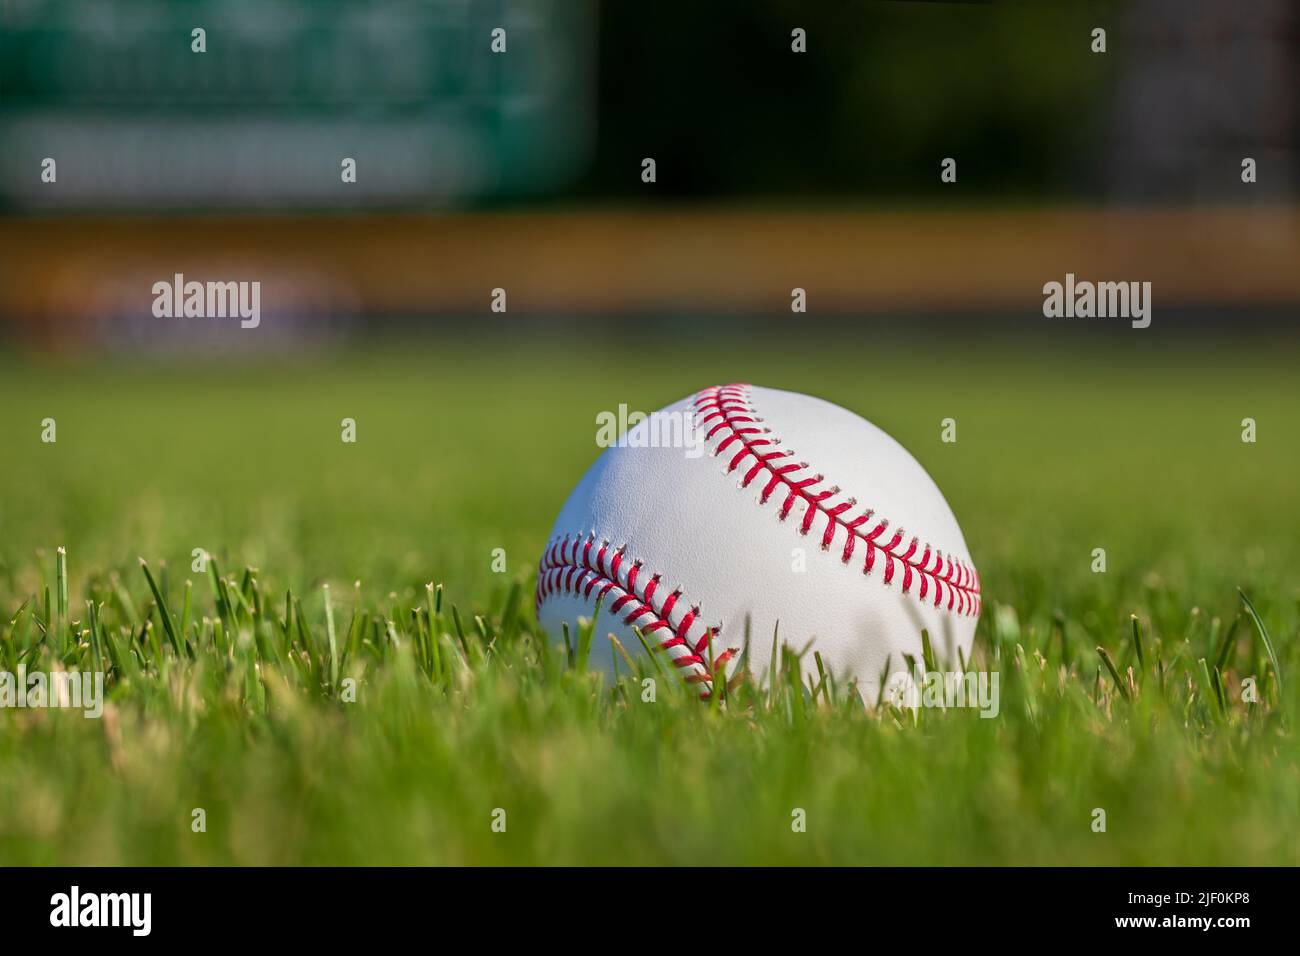 Low angle selective focus view of a baseball in grass with outfield fence in the background Stock Photo